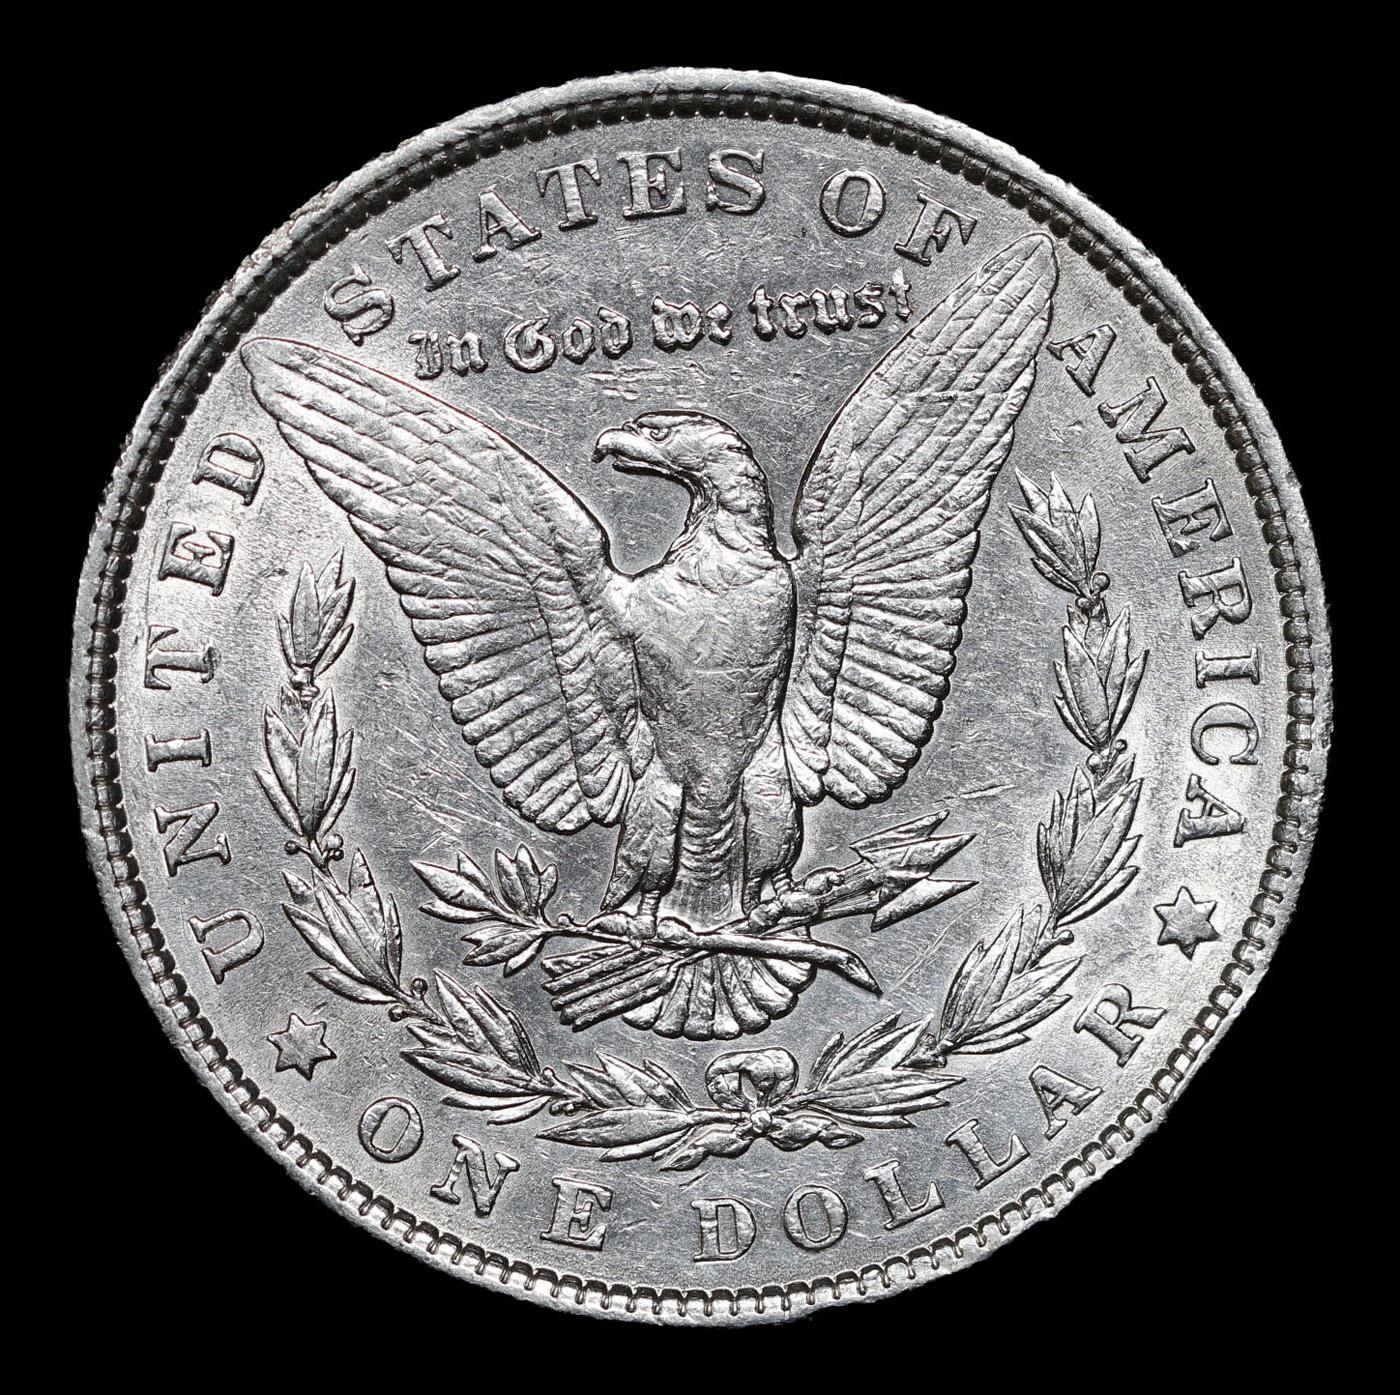 ***Auction Highlight*** 1901-p Morgan Dollar 1 Graded Select Unc By USCG (fc)